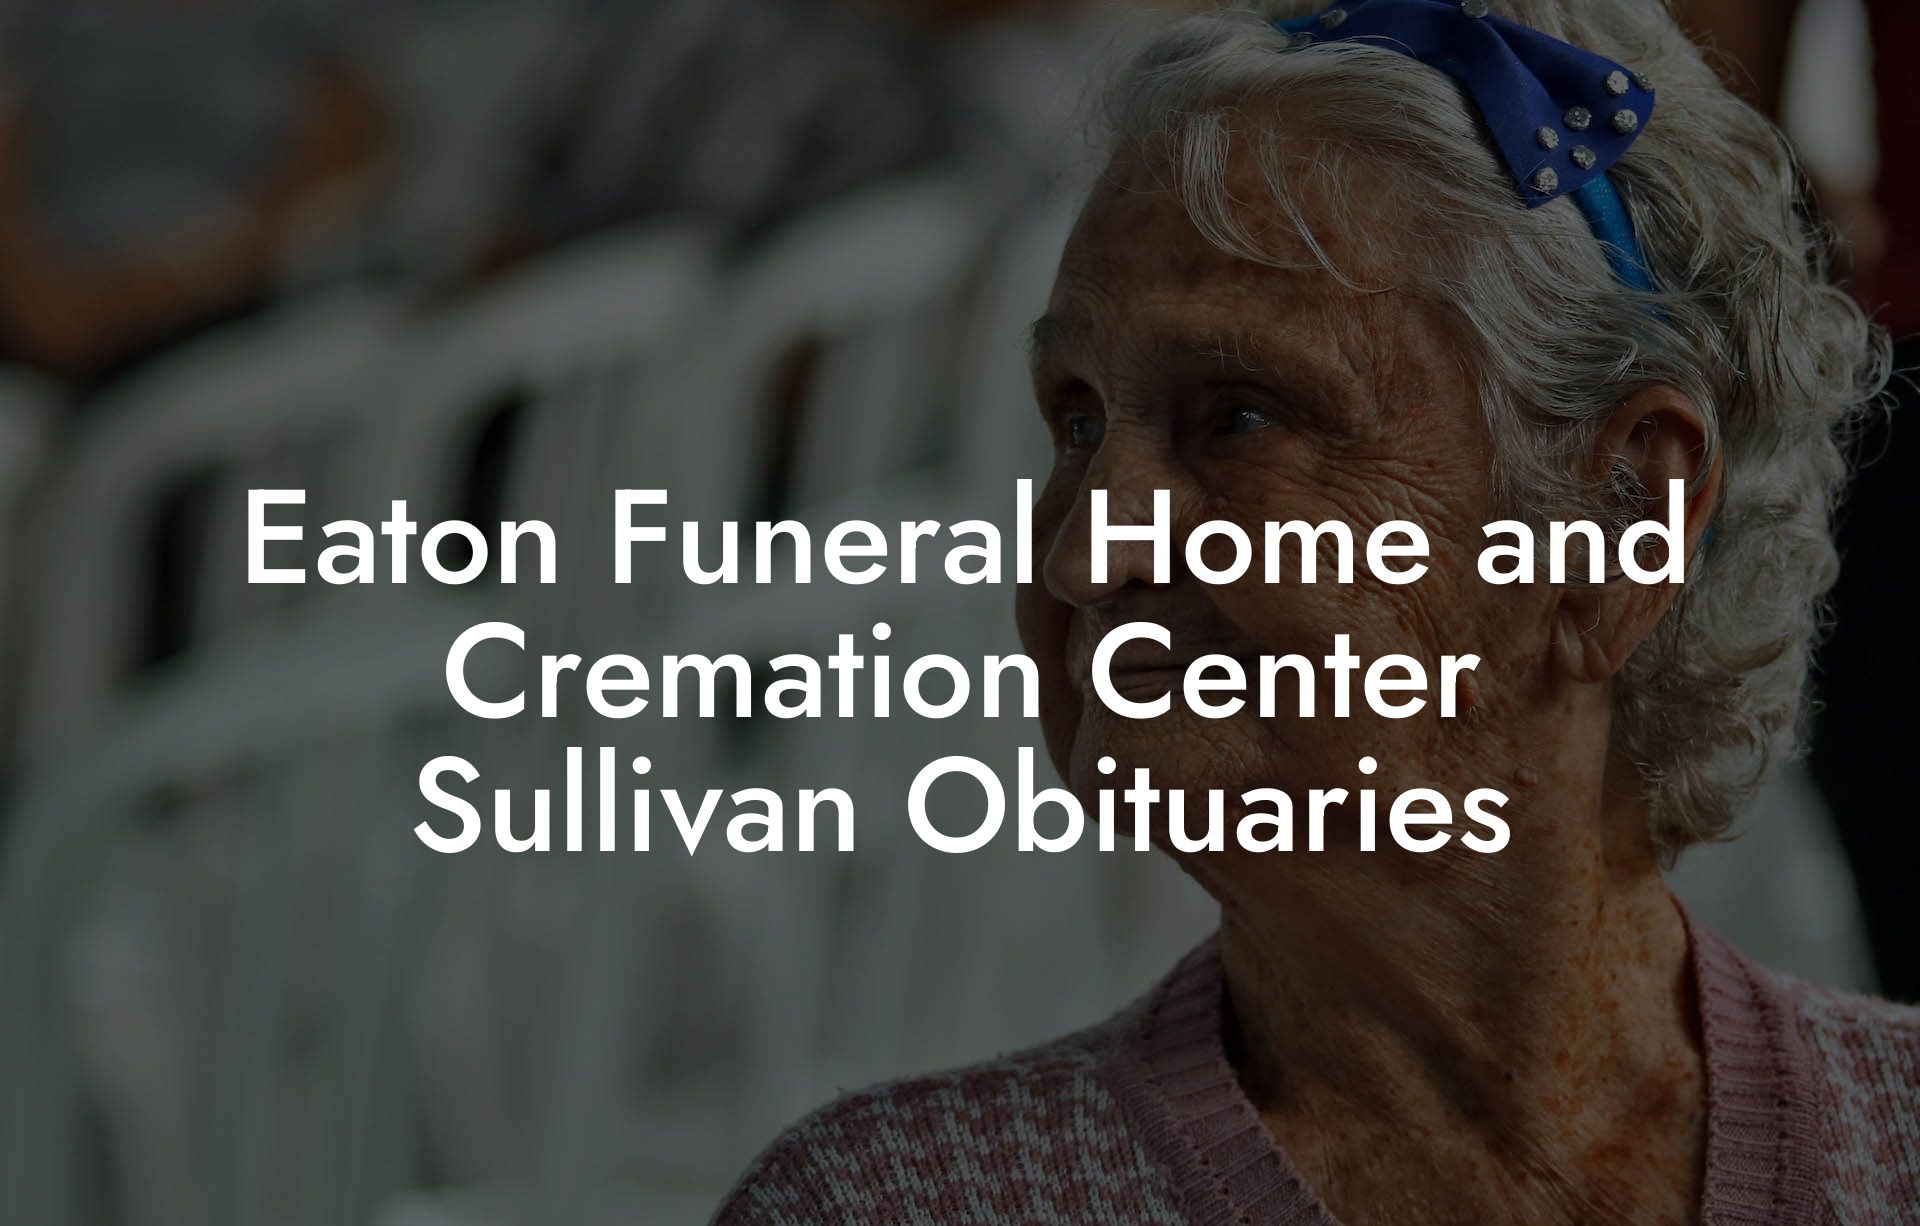 Eaton Funeral Home and Cremation Center Sullivan Obituaries - Eulogy ...